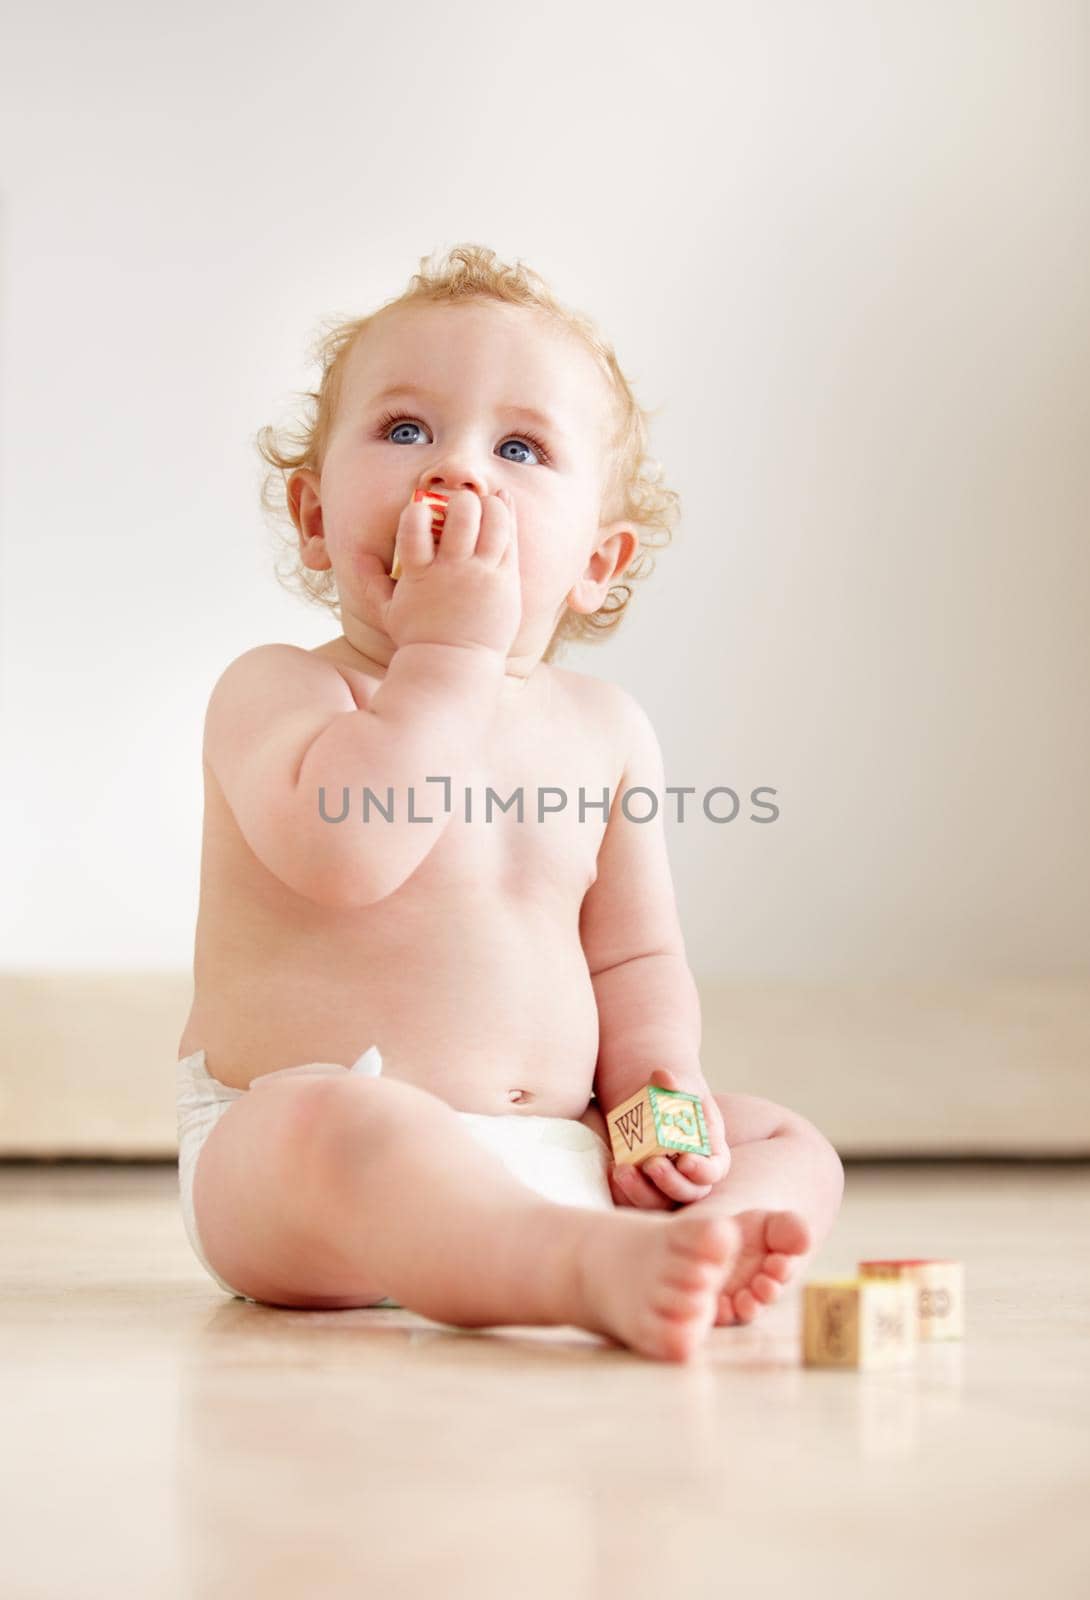 Cute baby boy looking up curiously while sitting on the floor.